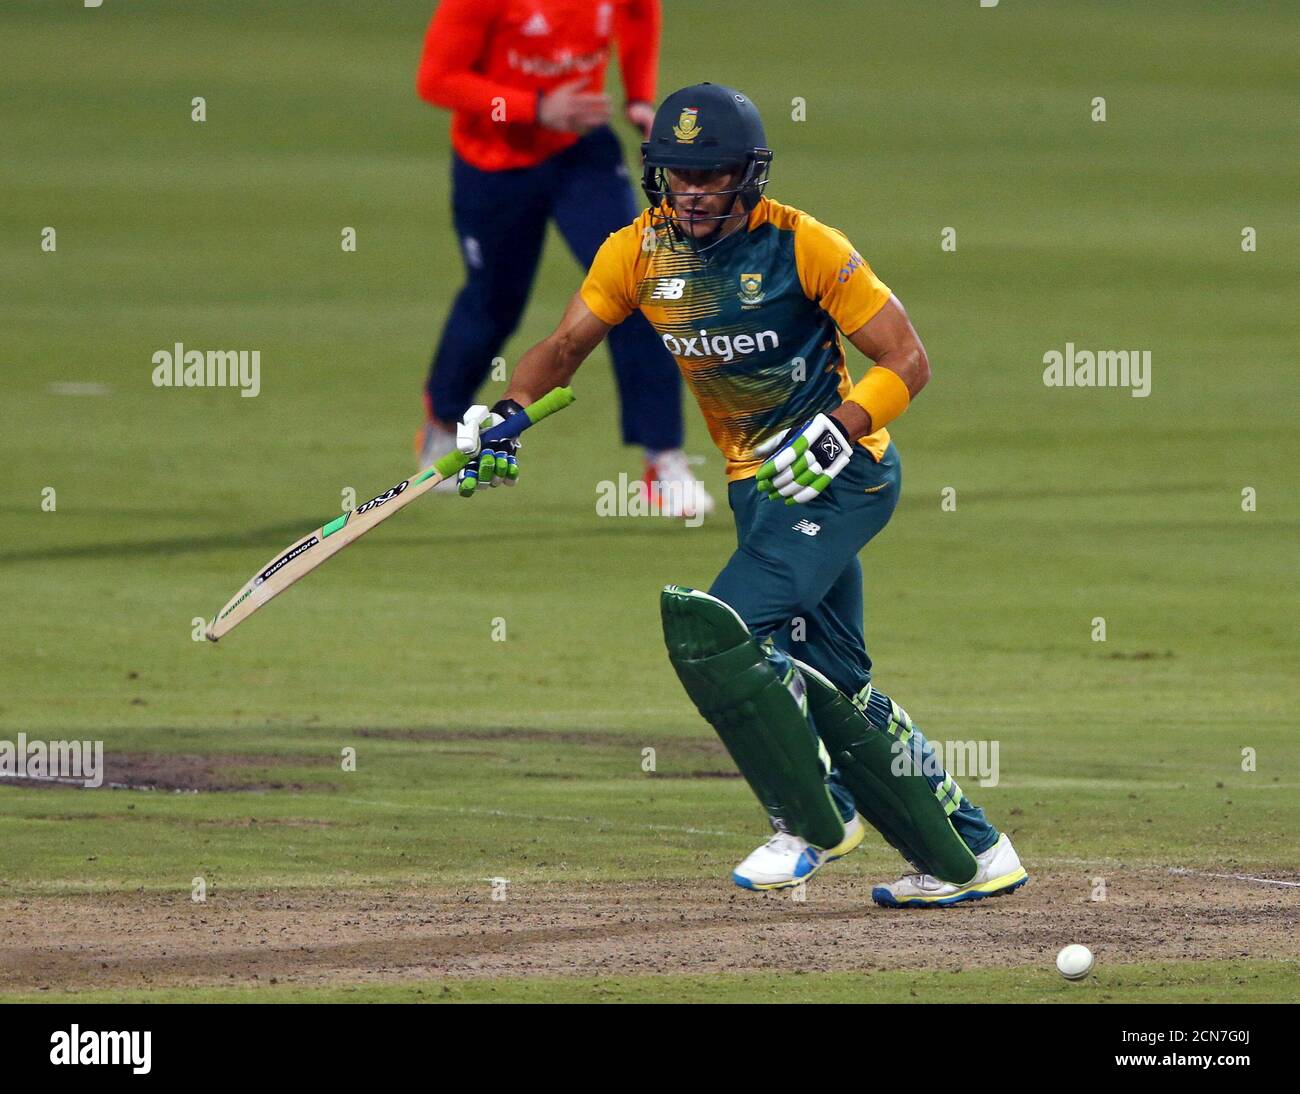 South Africa's Faf du Plessis runs between wickets during the Twenty20 (T20) International cricket match against England in Cape Town, South Africa, February 19, 2016. REUTERS/Mike Hutchings Stock Photo